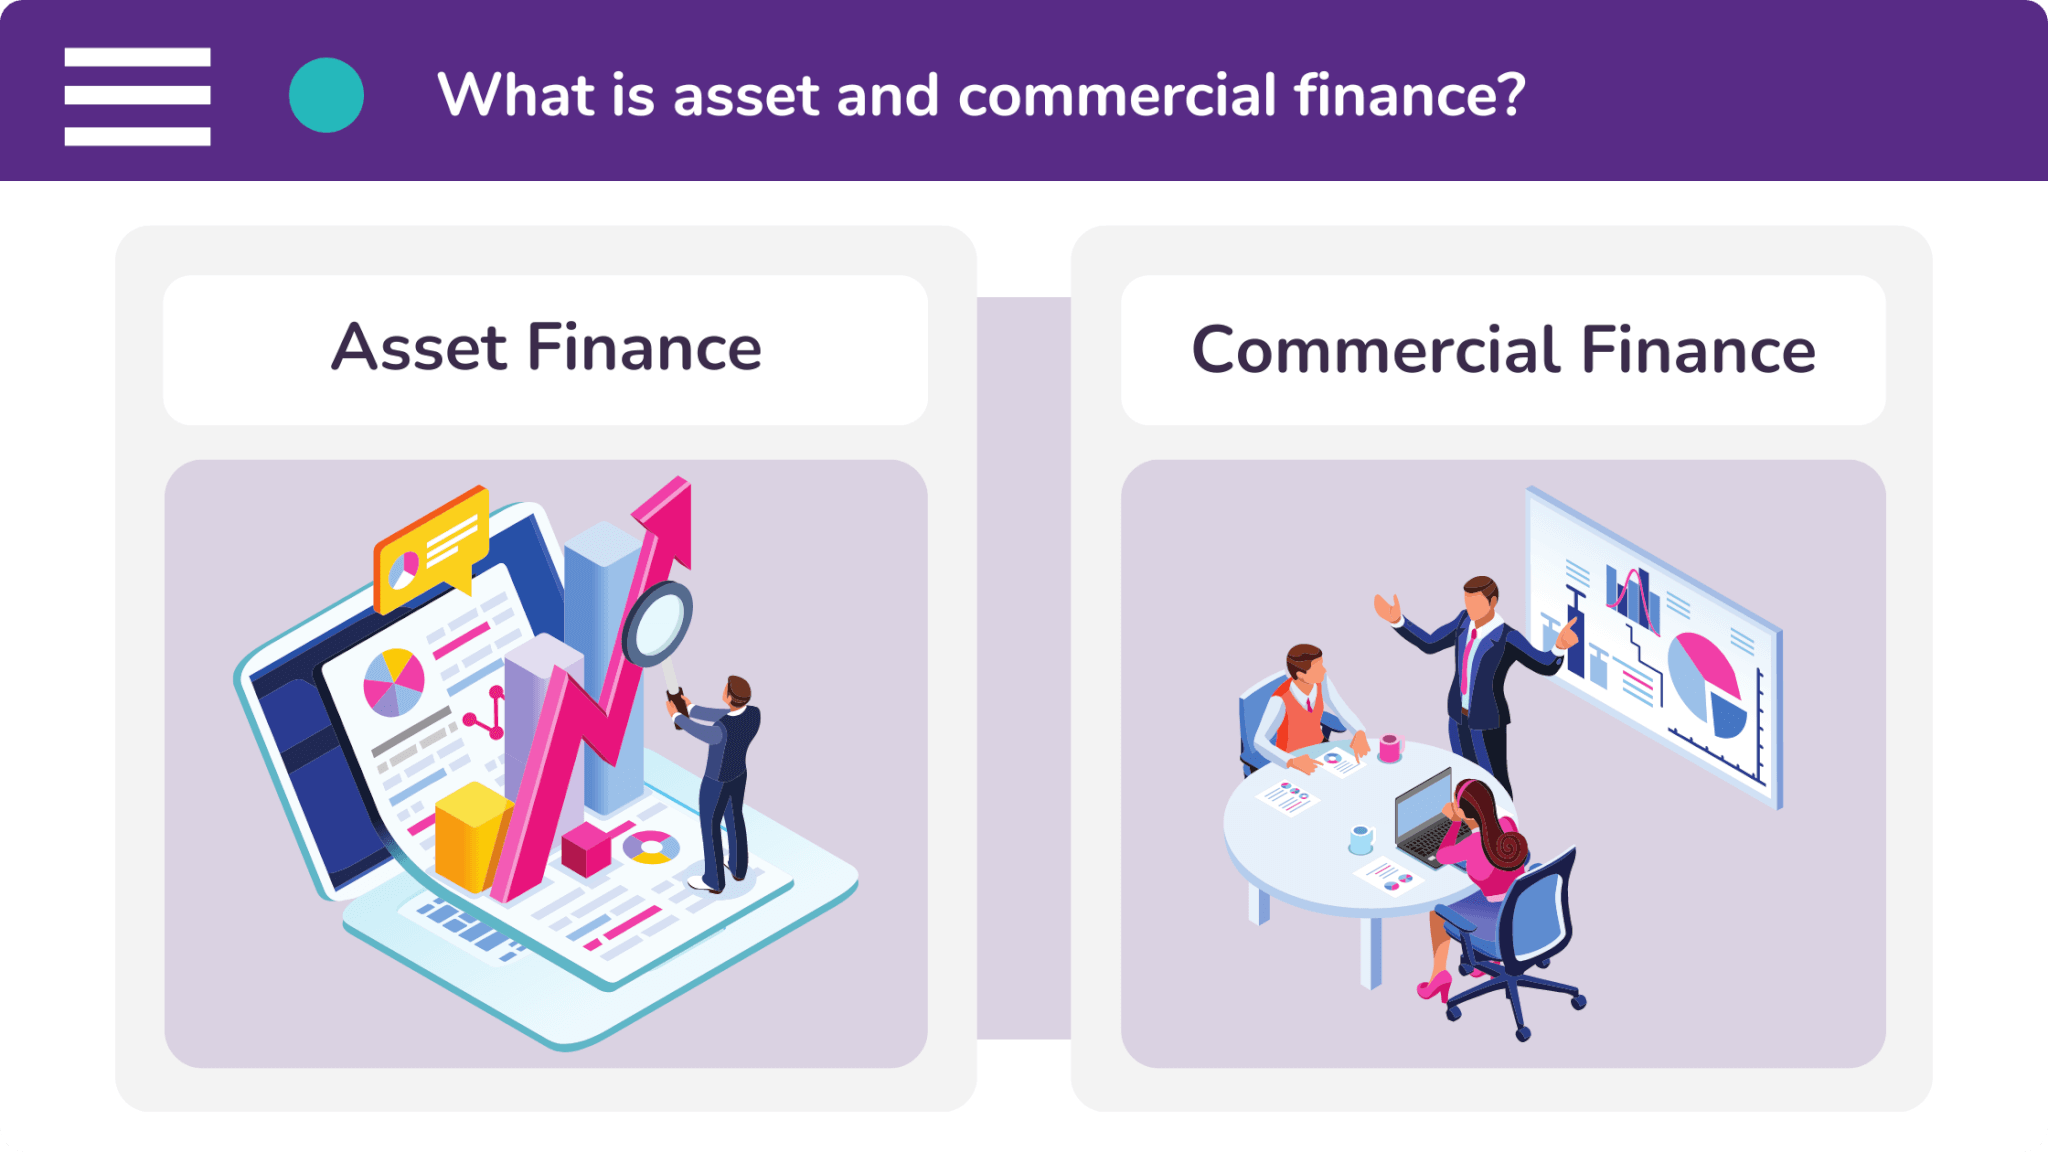 Asset finance is used by companies that want to spread the cost of equipment. Whereas commercial finance helps to improve your cash flow.